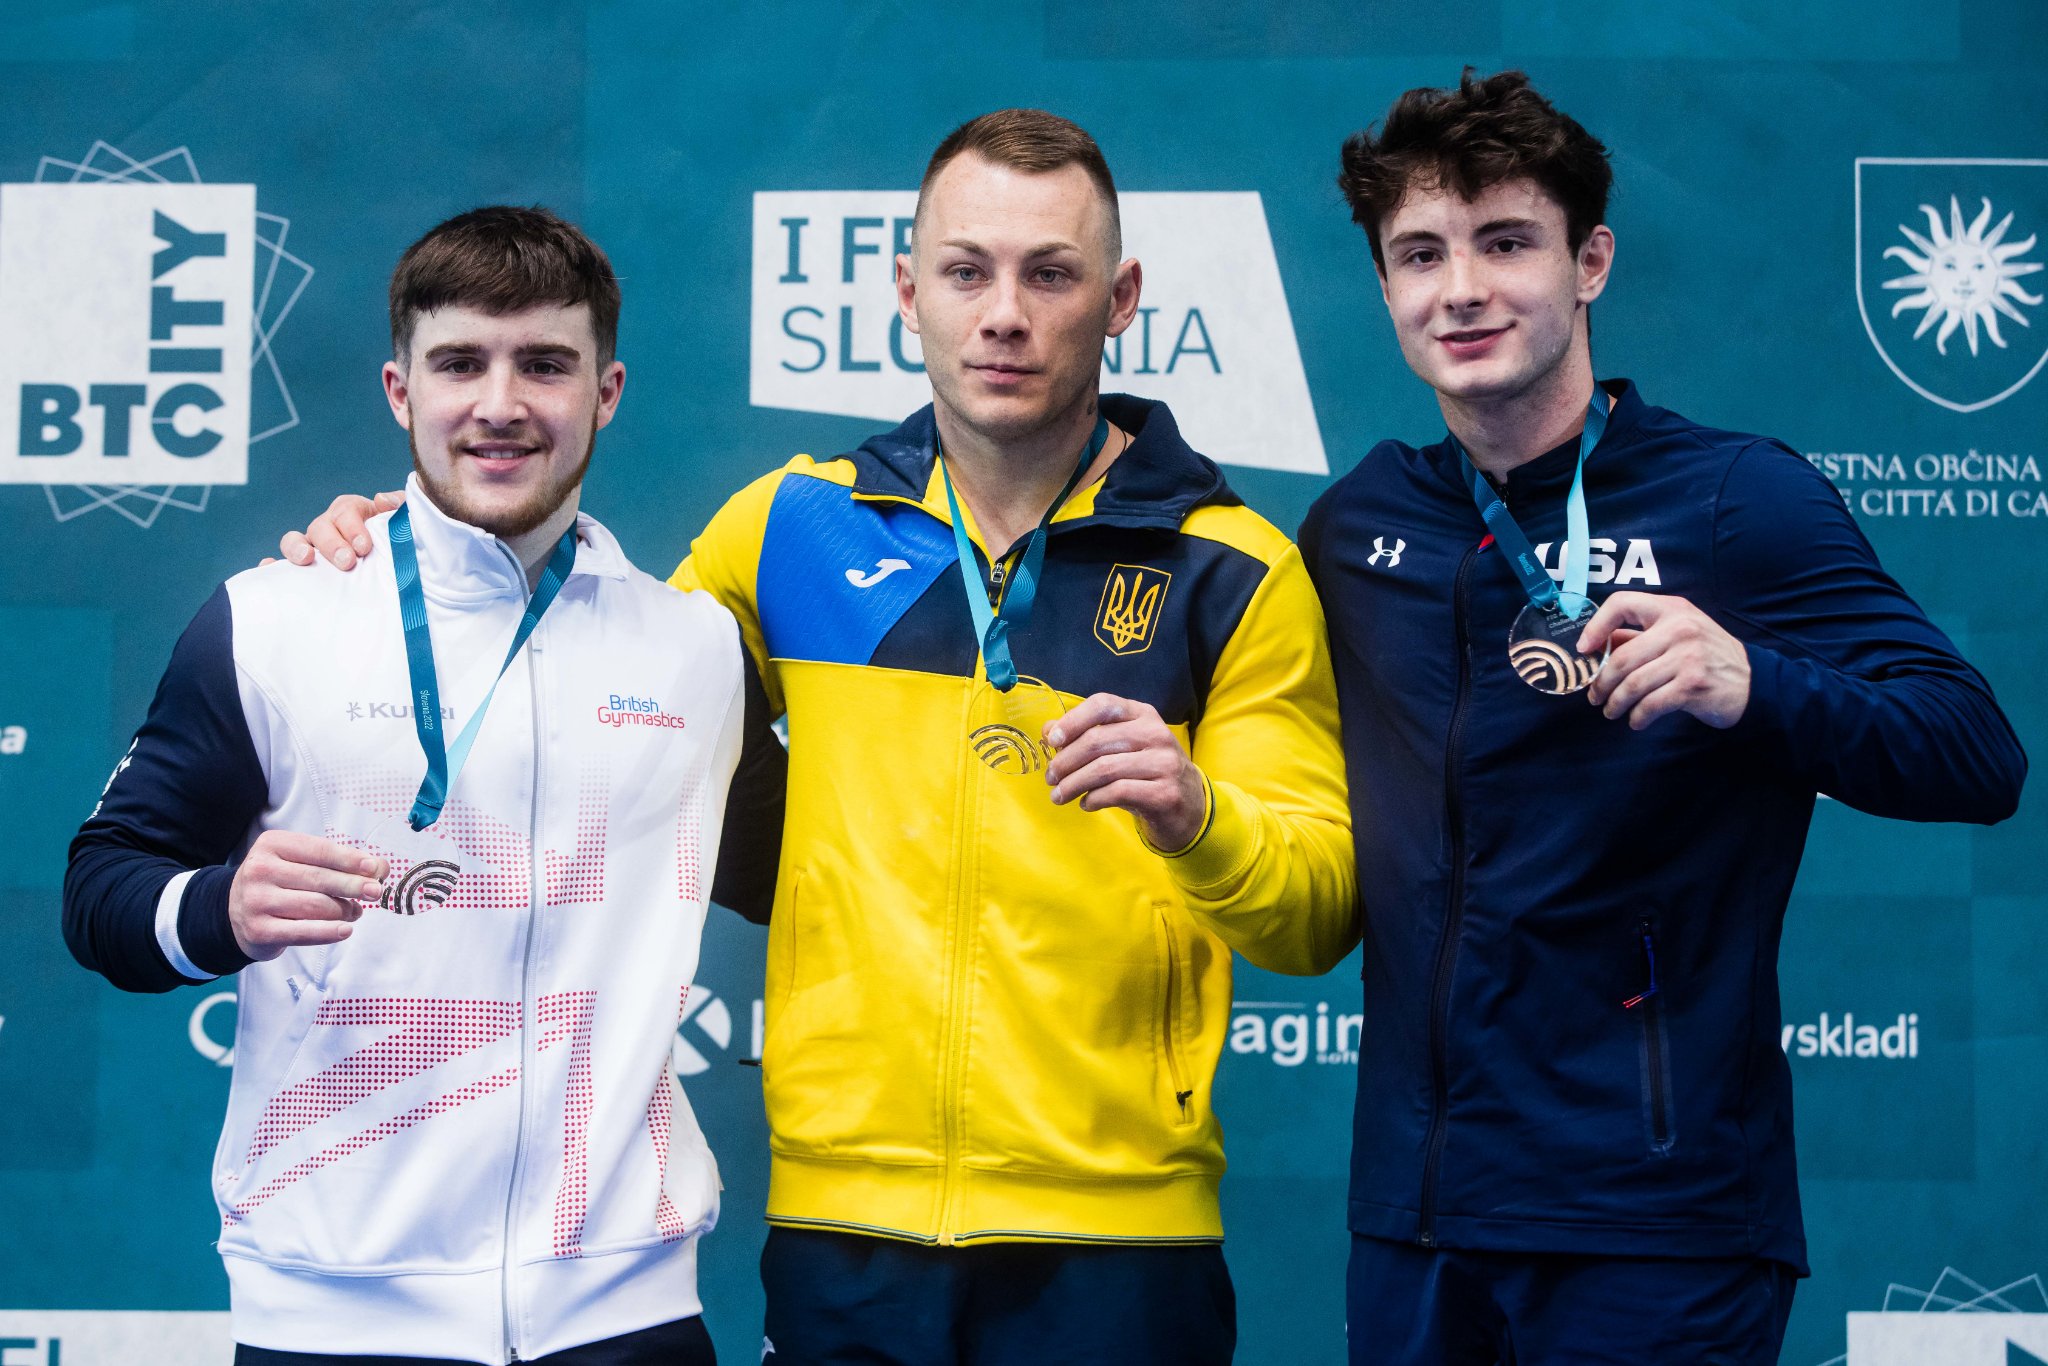 Harry Hepworth winning vault silver at the World Cup in Solvenia in June 2022